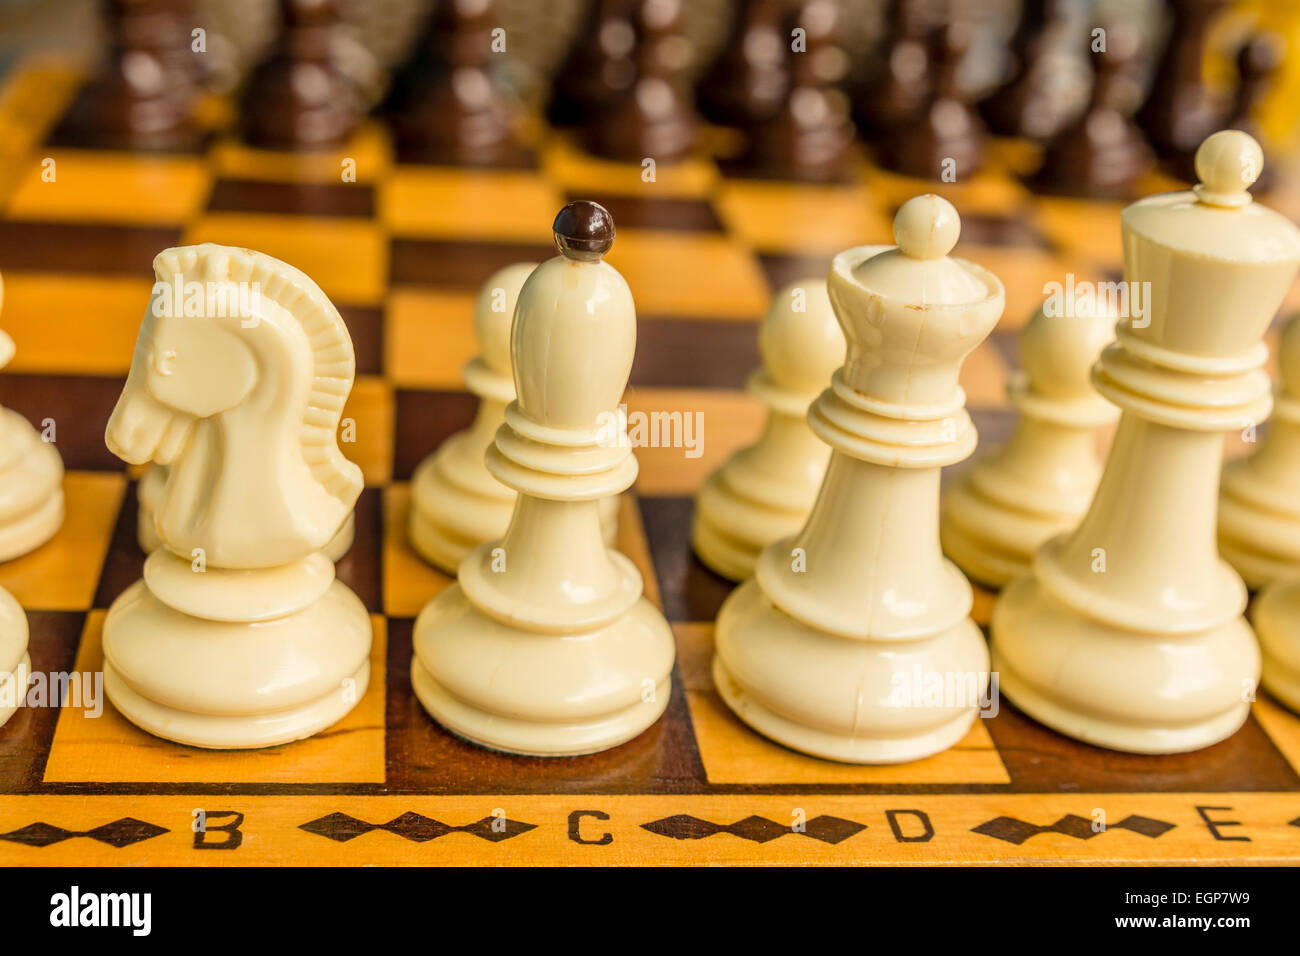 Chess board with starting positions aligned chess pieces Stock Photo